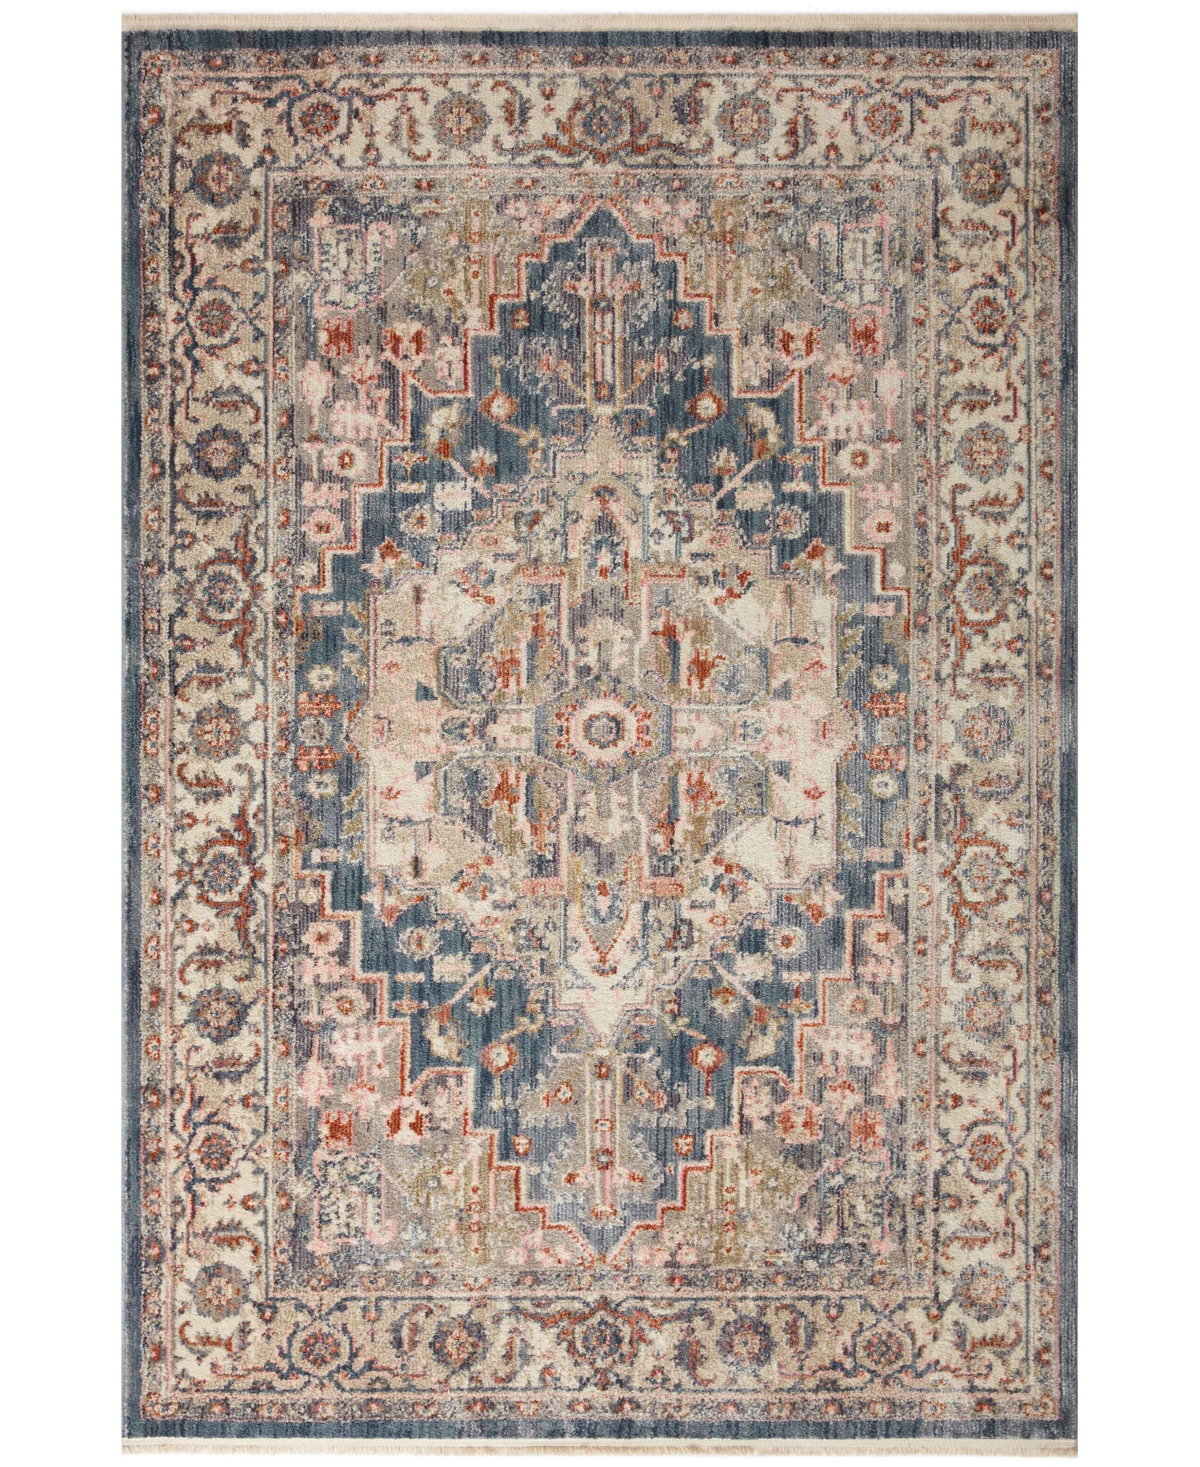 Magnolia Home By Joanna Gaines X Loloi Janey Jay-03 3'11" X 5'11" Area Rug In Indigo